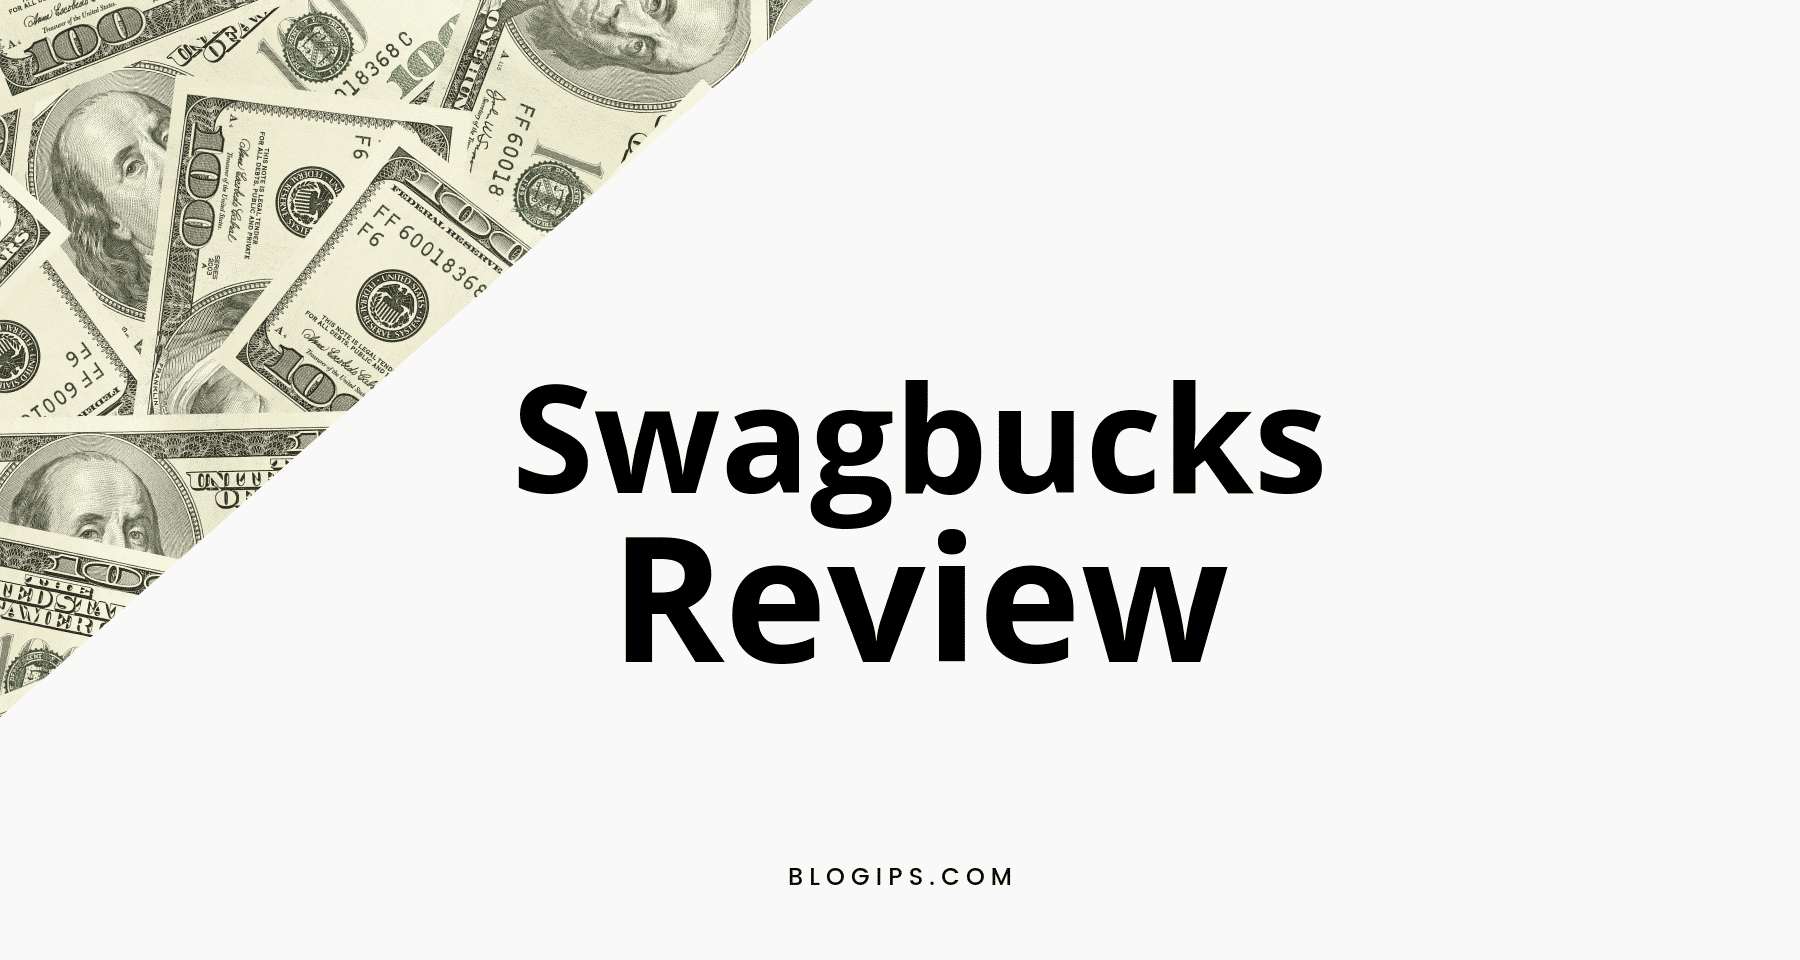 Swagbucks Review – How To Earn Gift Cards, Codes And Cash